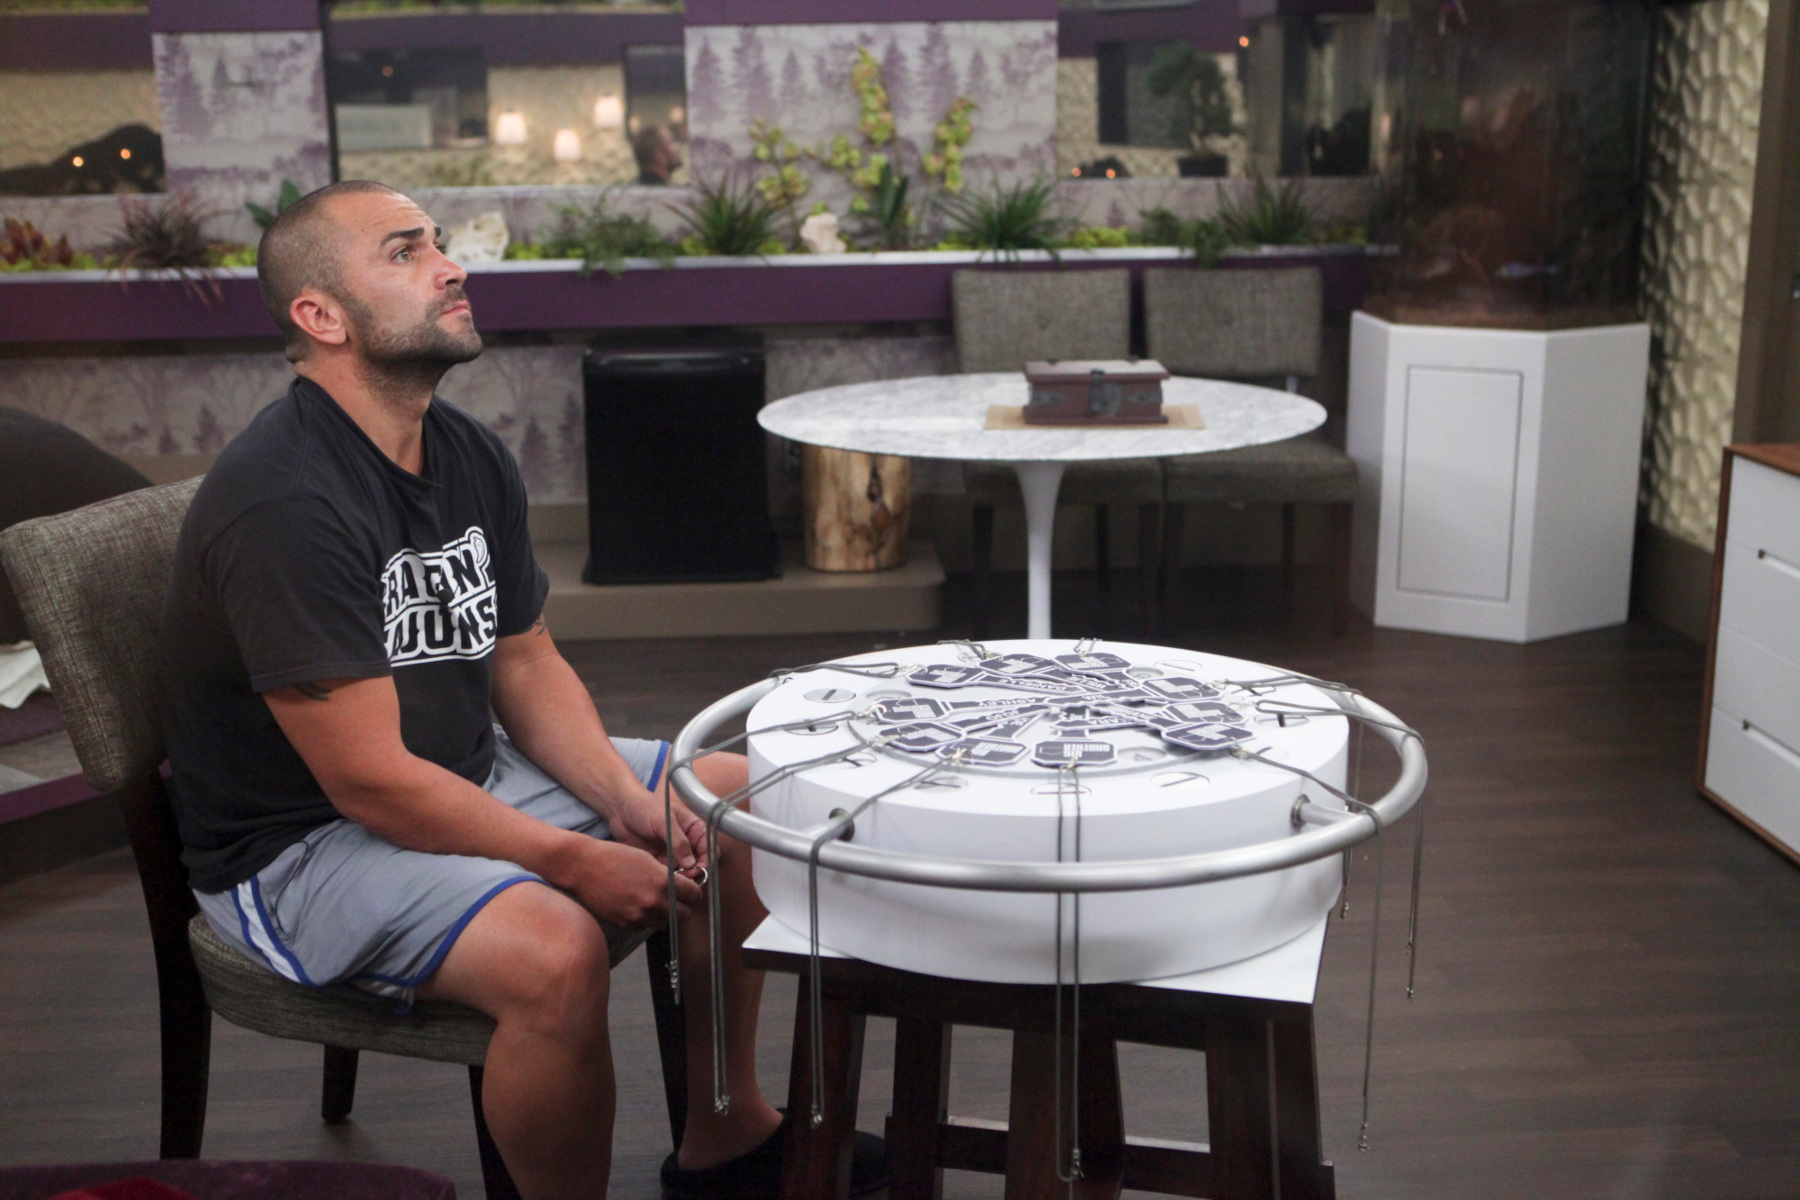 'Big Brother' Season 14 contestant Willie Hantz. He's sitting at a table and thinking.